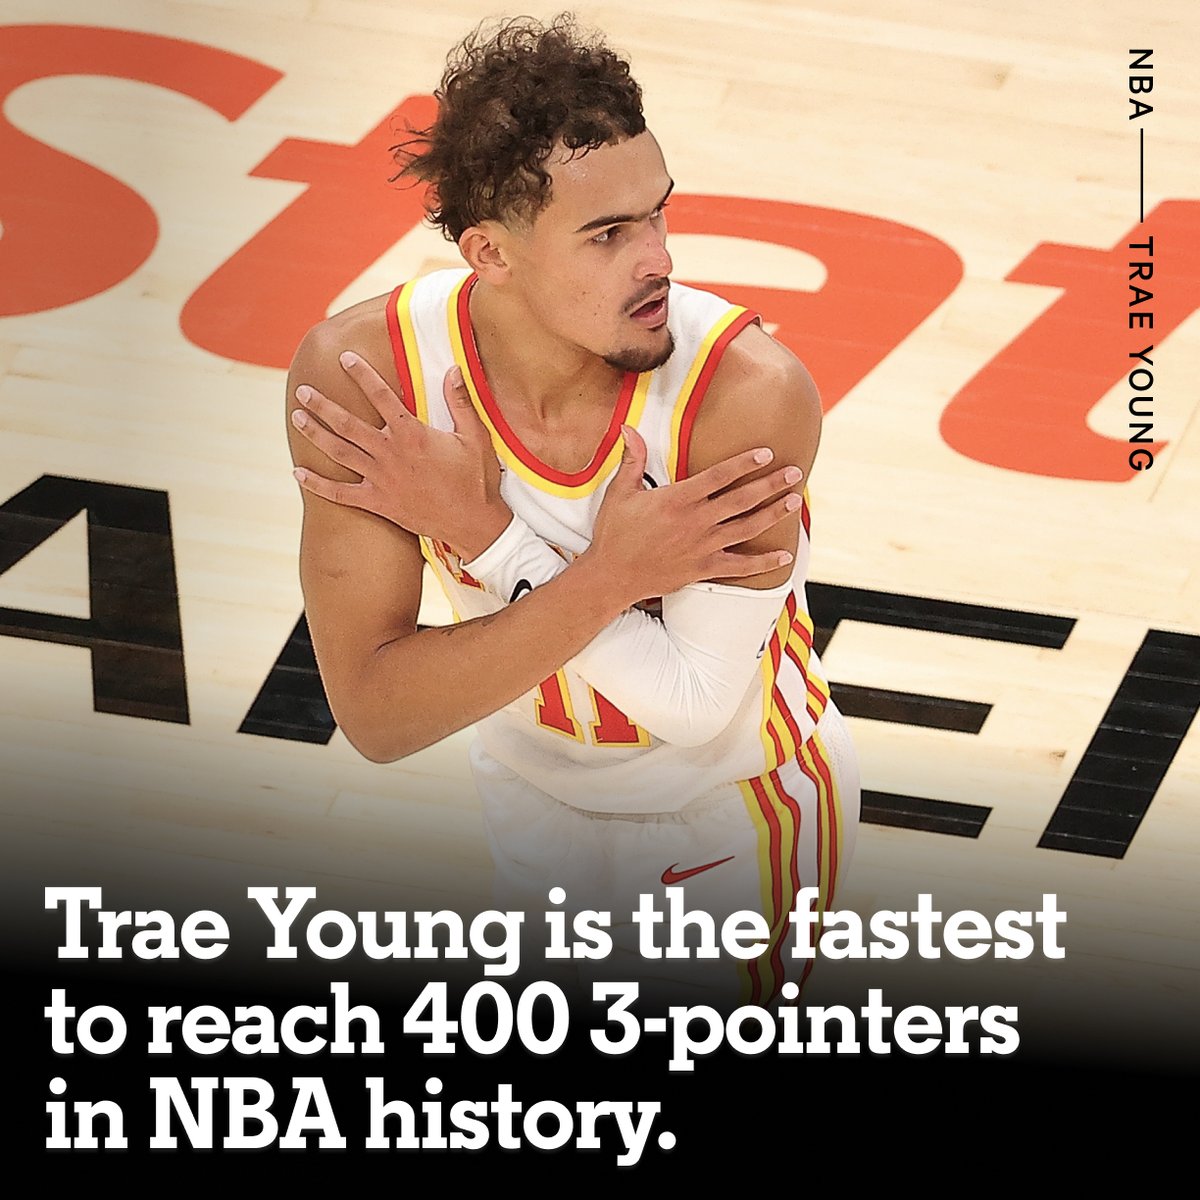 The Athletic on Twitter: "Trae Young has made 400 3-pointers faster than  anyone in NBA history. ❄️📈 https://t.co/aDIsLT8g5E" / Twitter